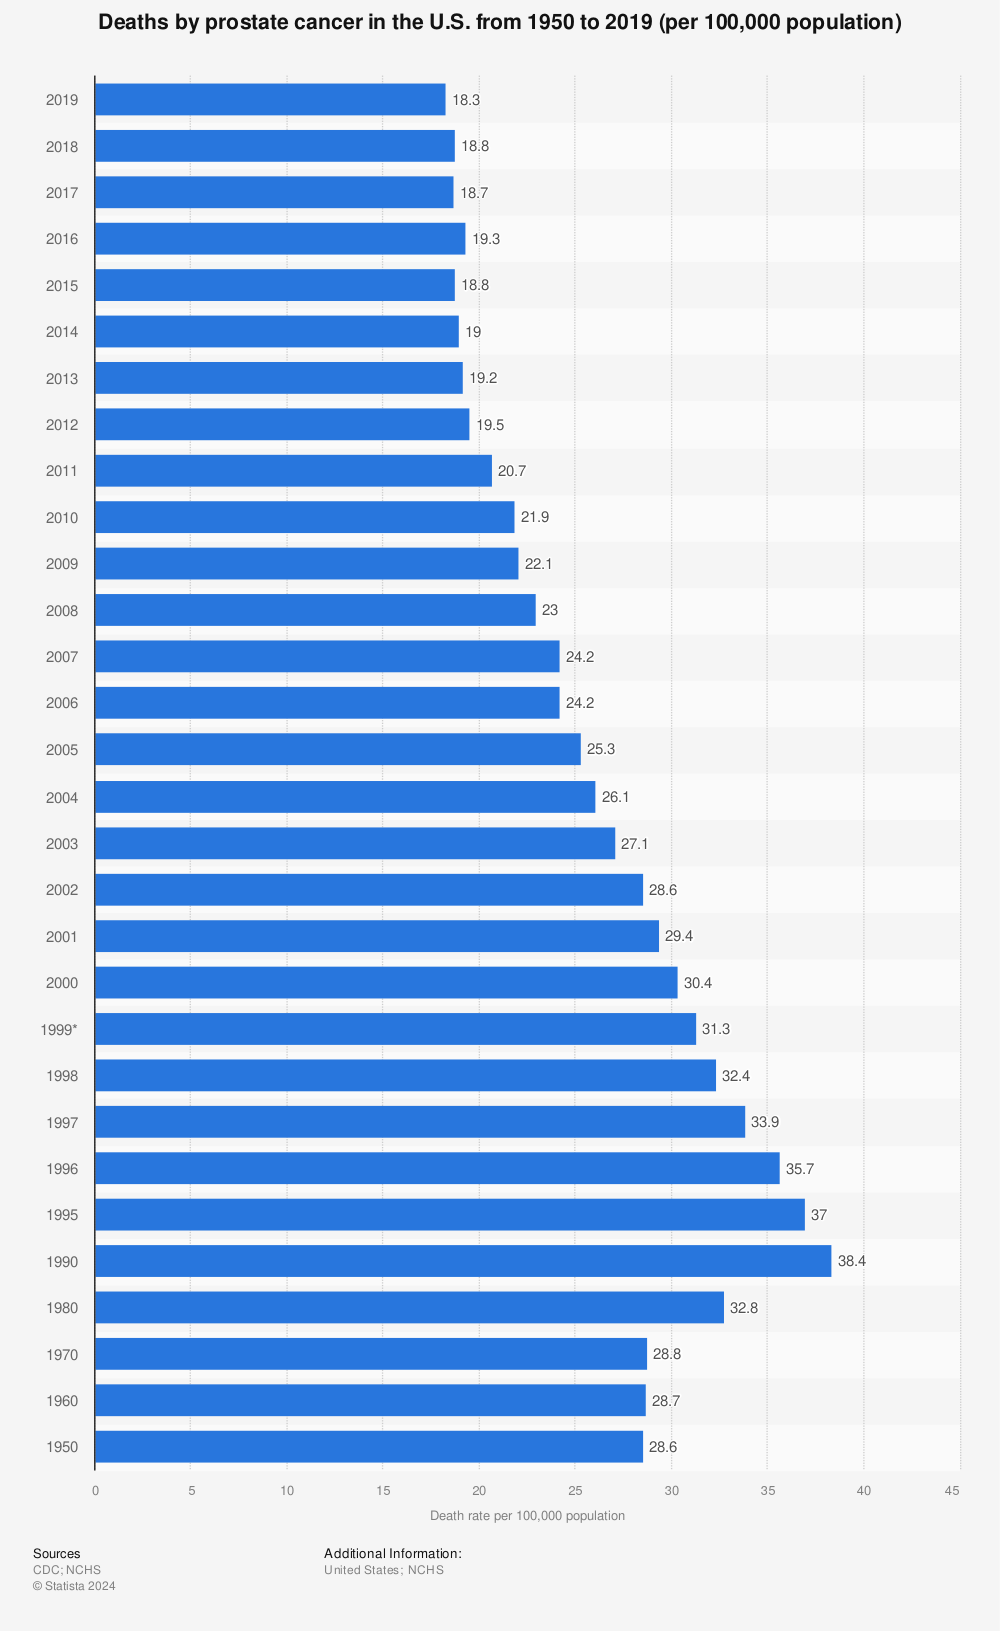 Statistic: Deaths by prostate cancer in the U.S. from 1950 to 2018 (per 100,000 population) | Statista